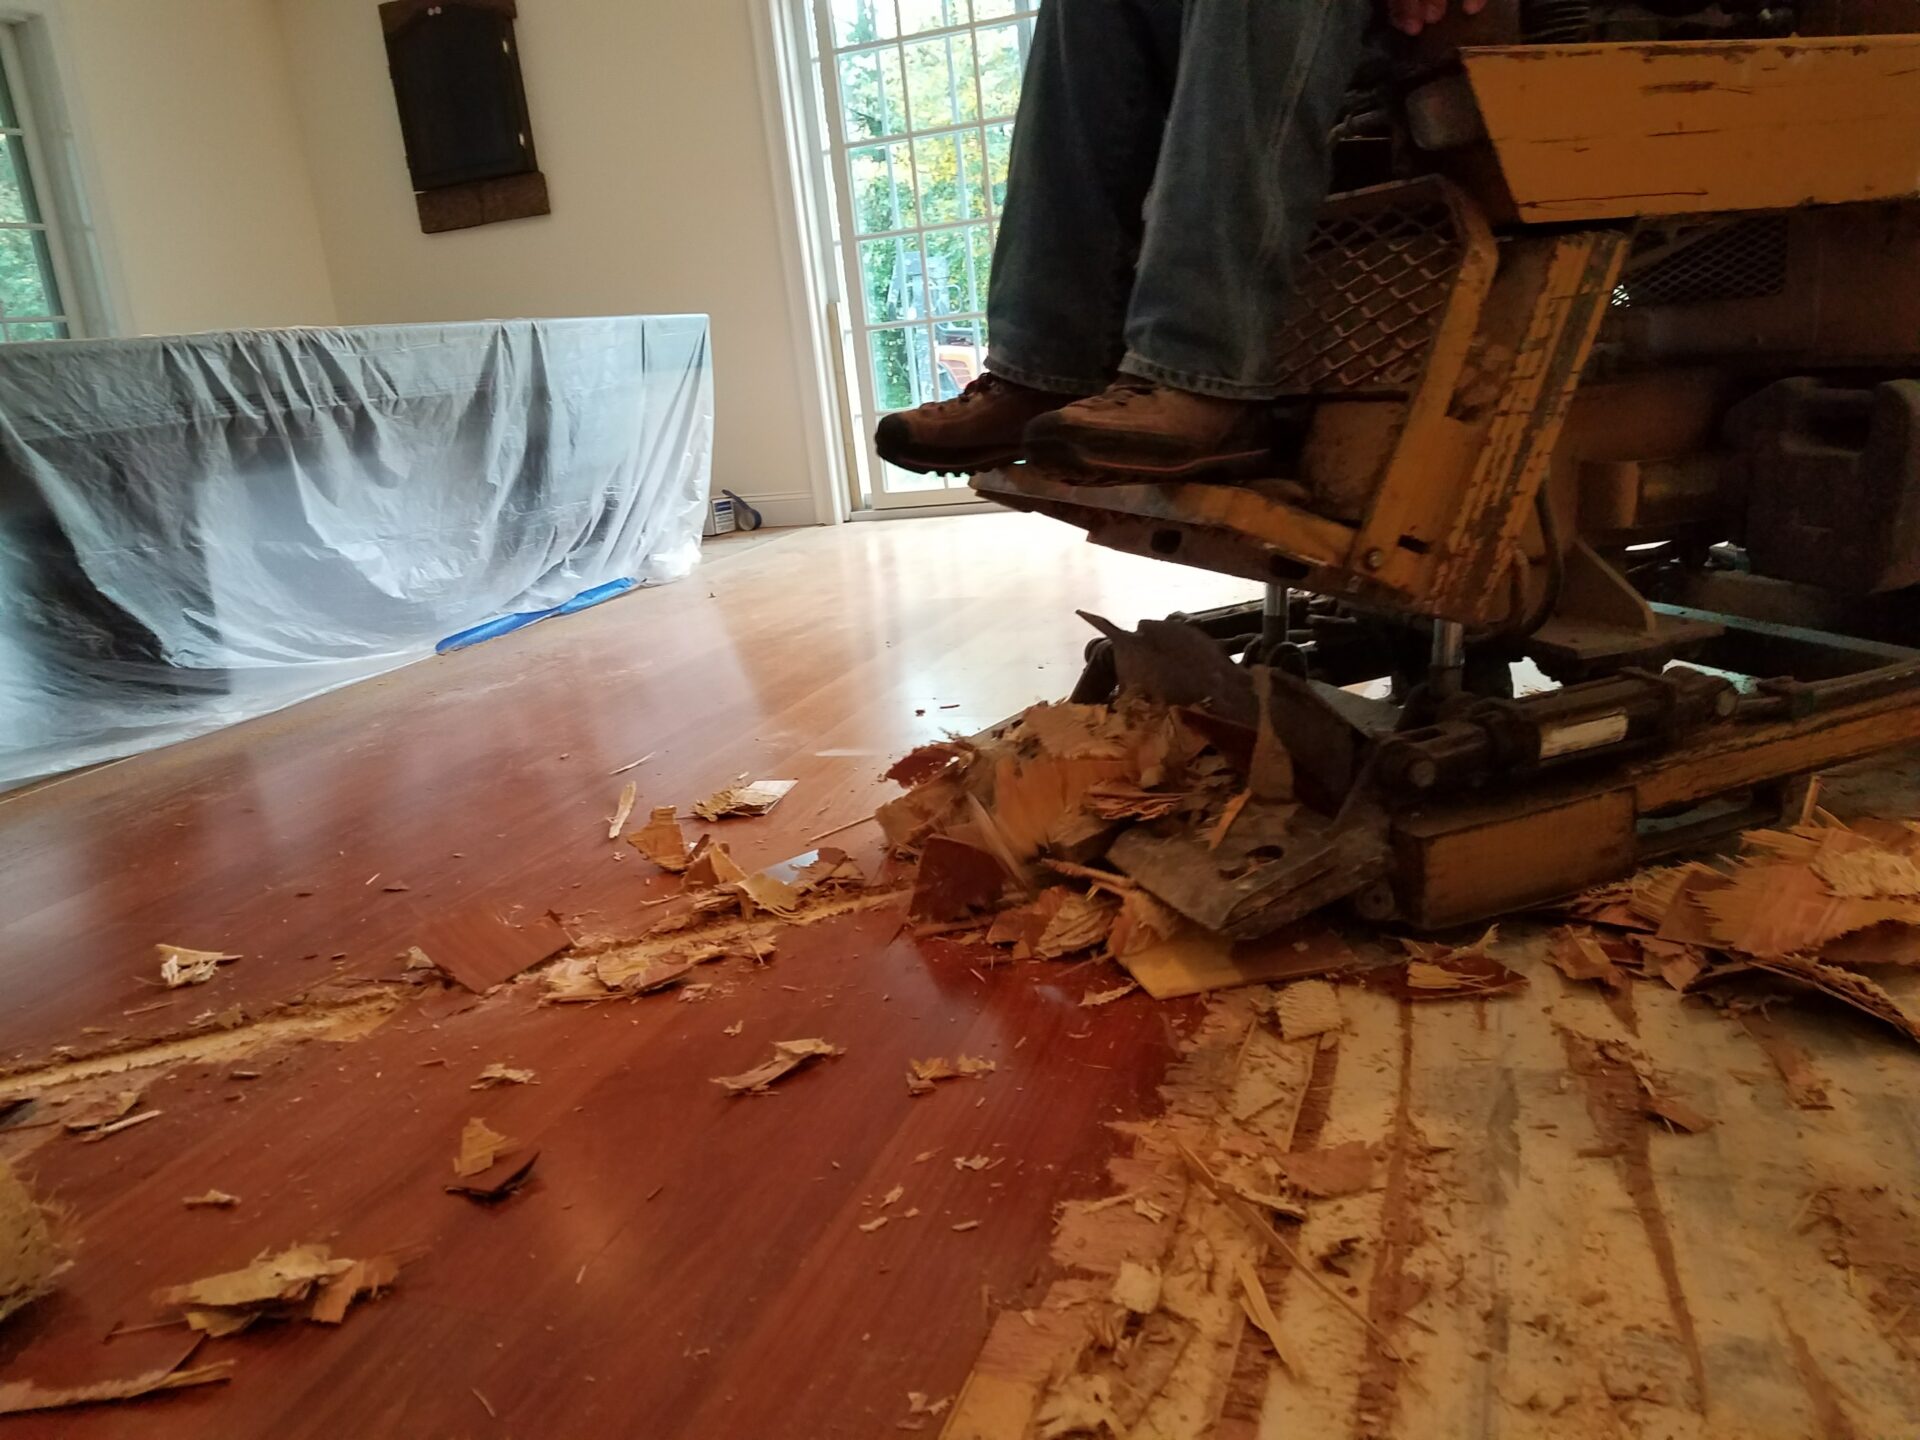 Hardwoods in herringbone pattern glued down to slab. After the hardwoods were removed, an additional/extra pass was made to remove residual adhesive material.